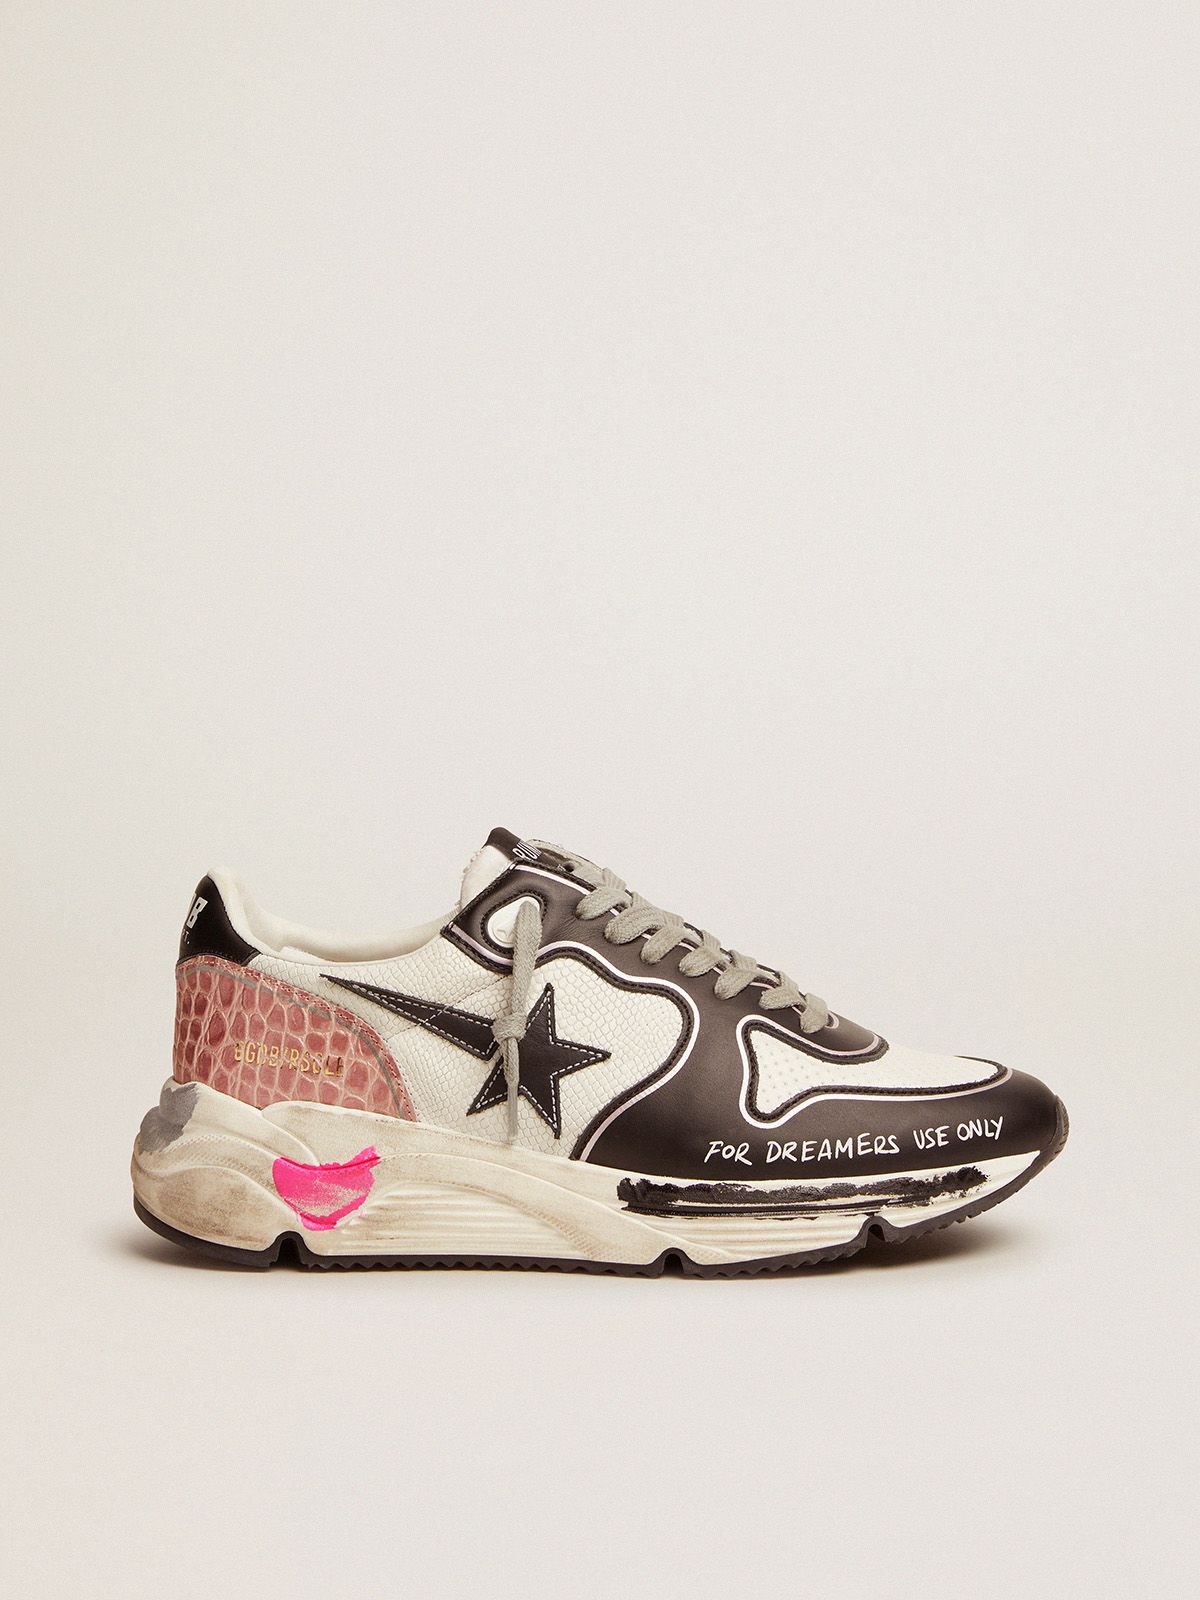 Golden Goose Ball Star Uomo Running Sole sneakers in white snake-print leather with contrasting black details